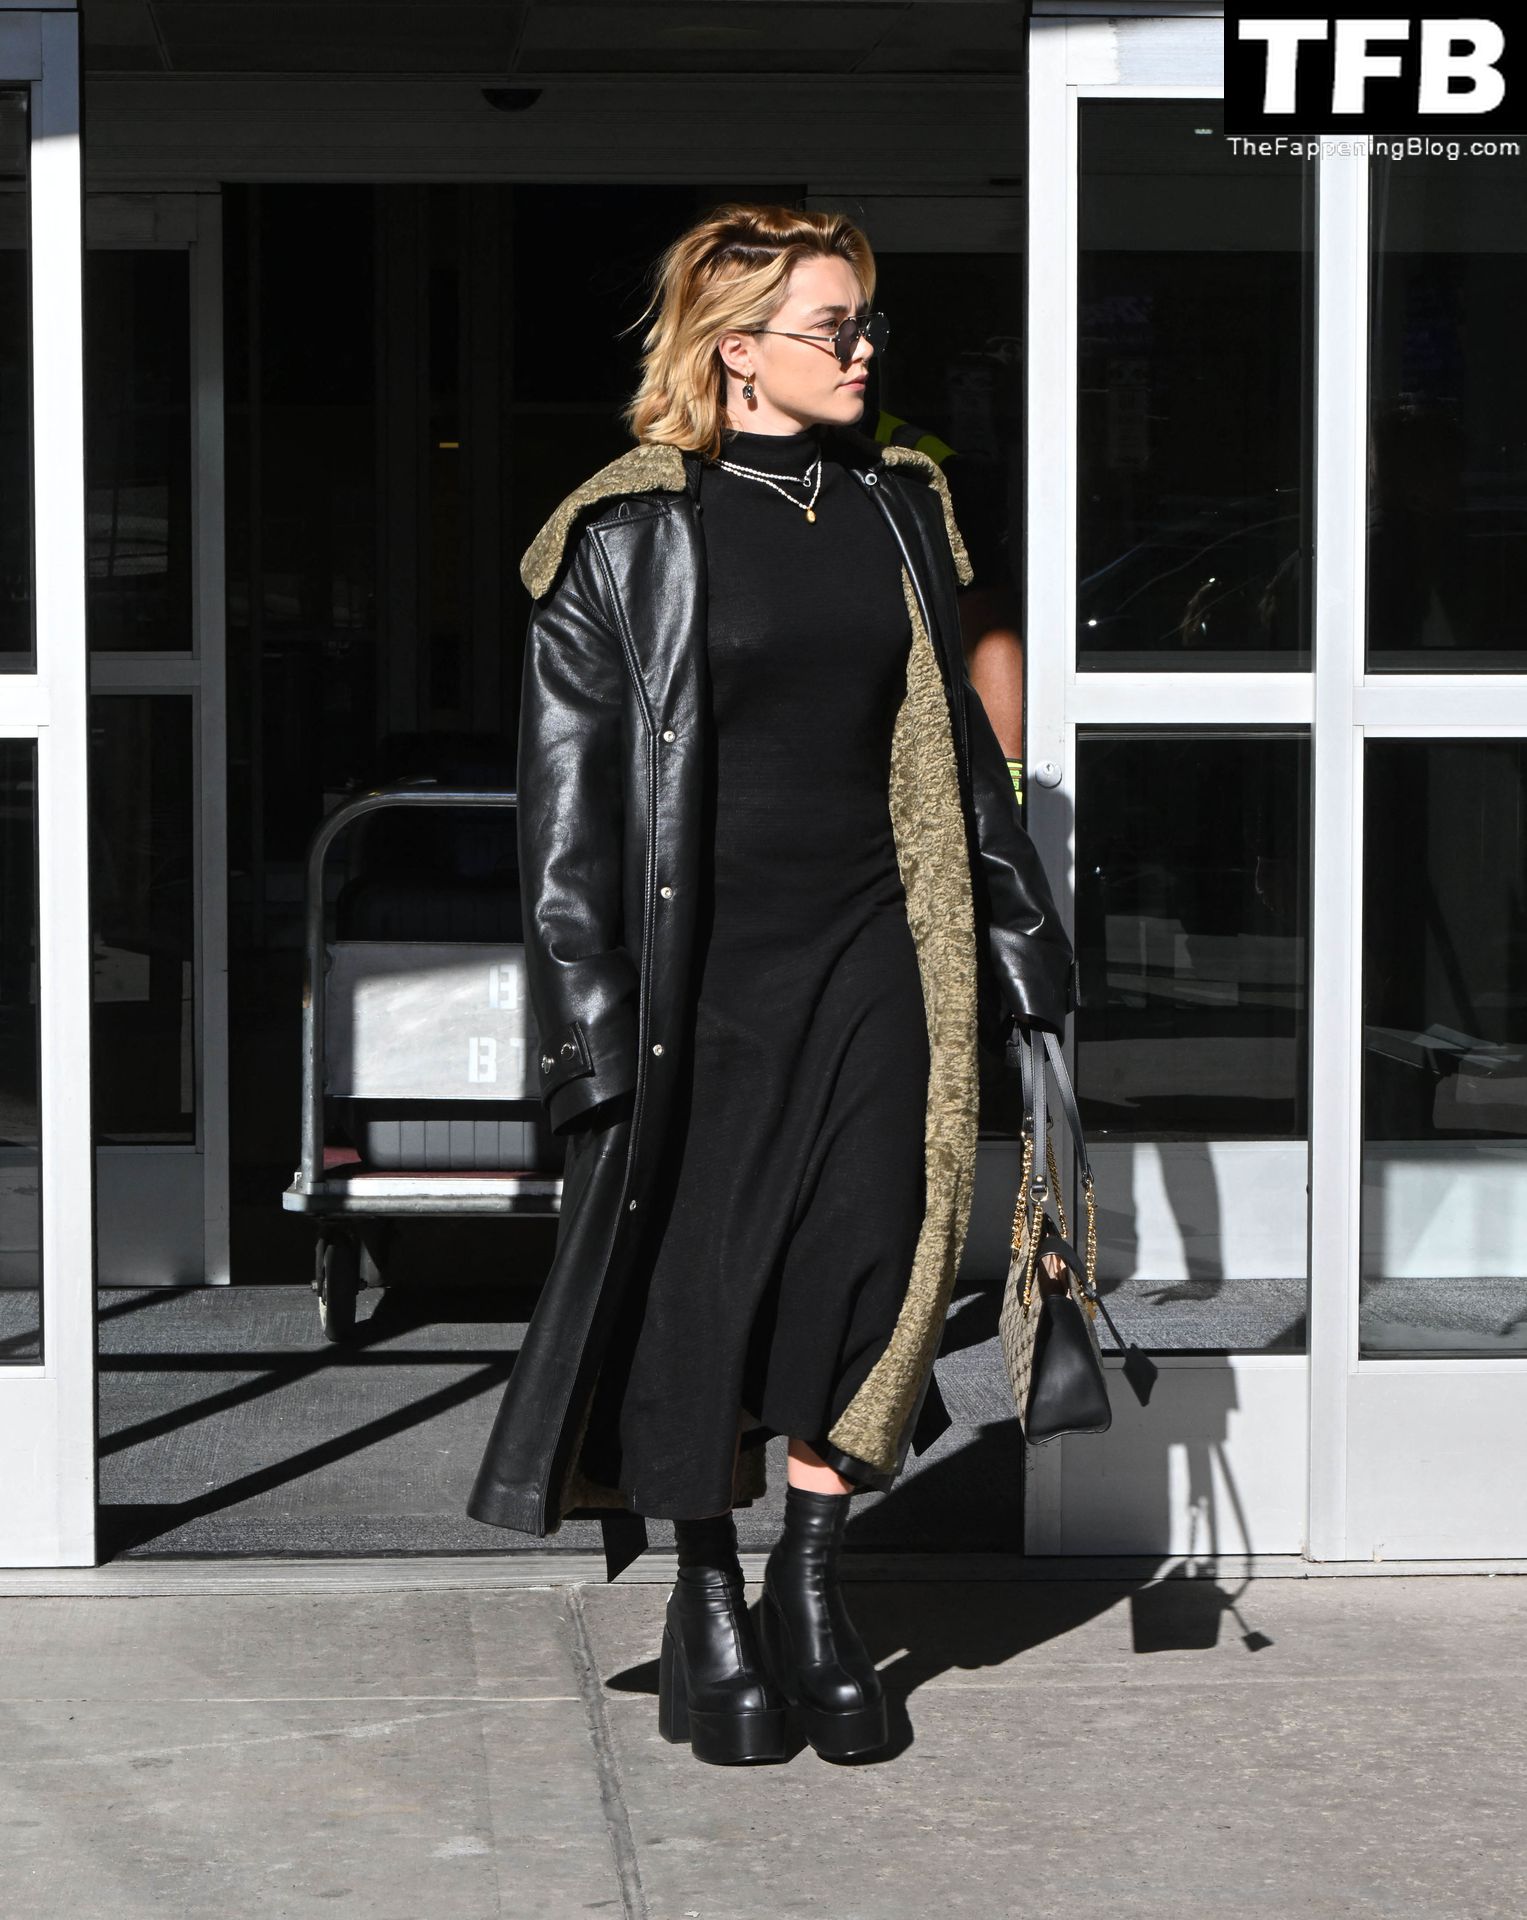 Florence Pugh Pokies The Fappening Blog 13 - Florence Pugh Shows Off Her Pokies at JFK airport in NYC (31 Photos)